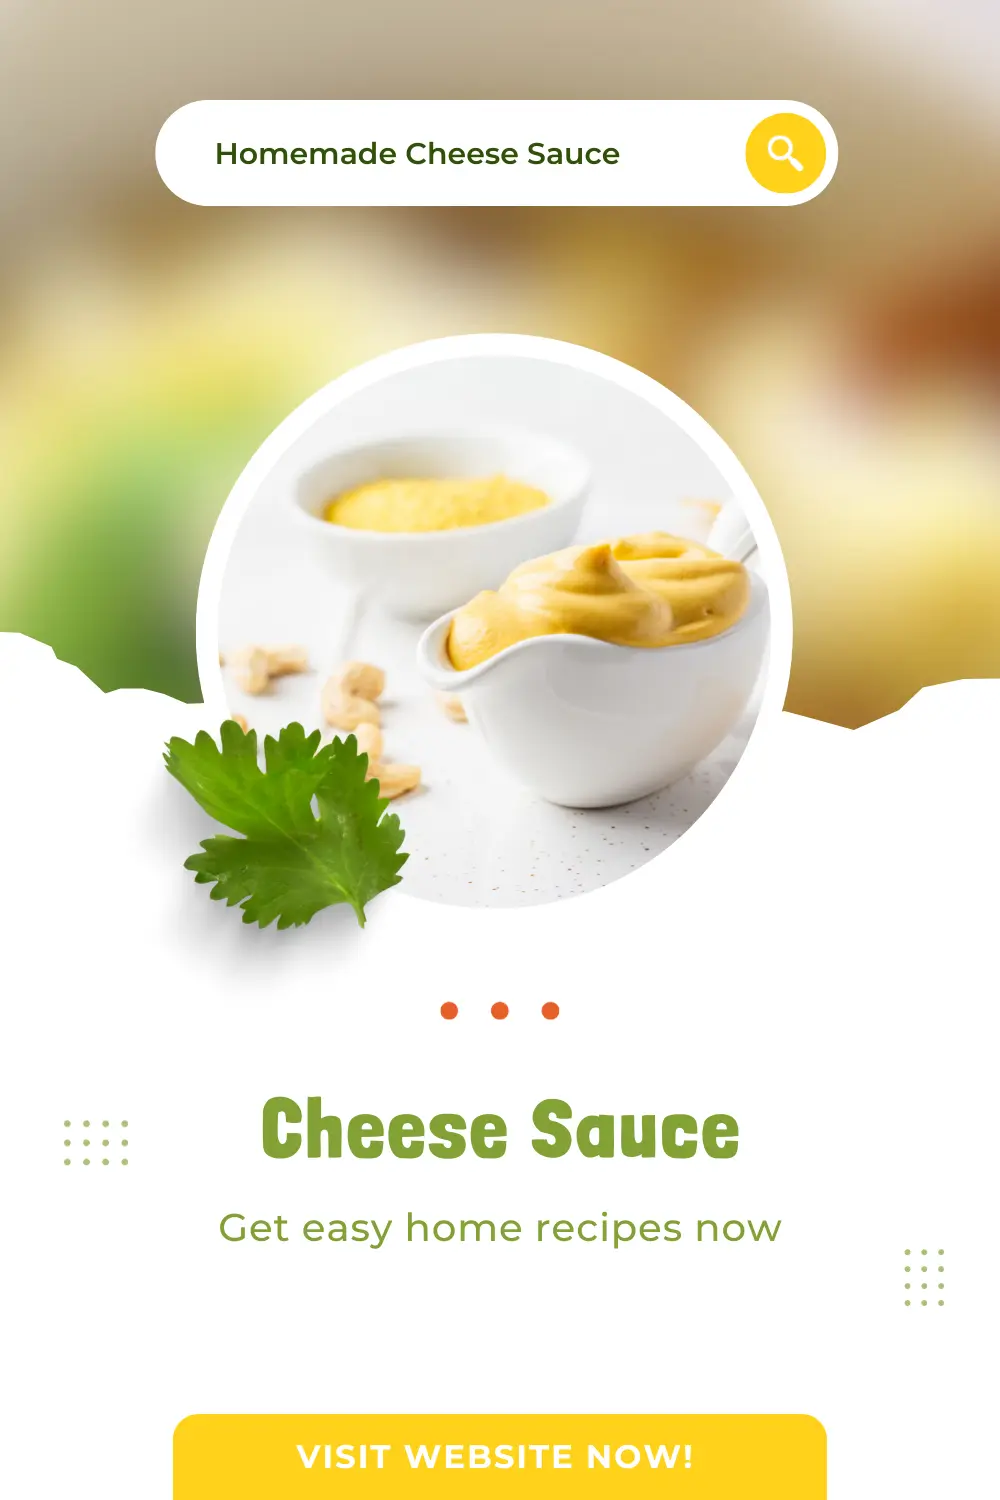 How Do You Make Cheese Sauce From Scratch?